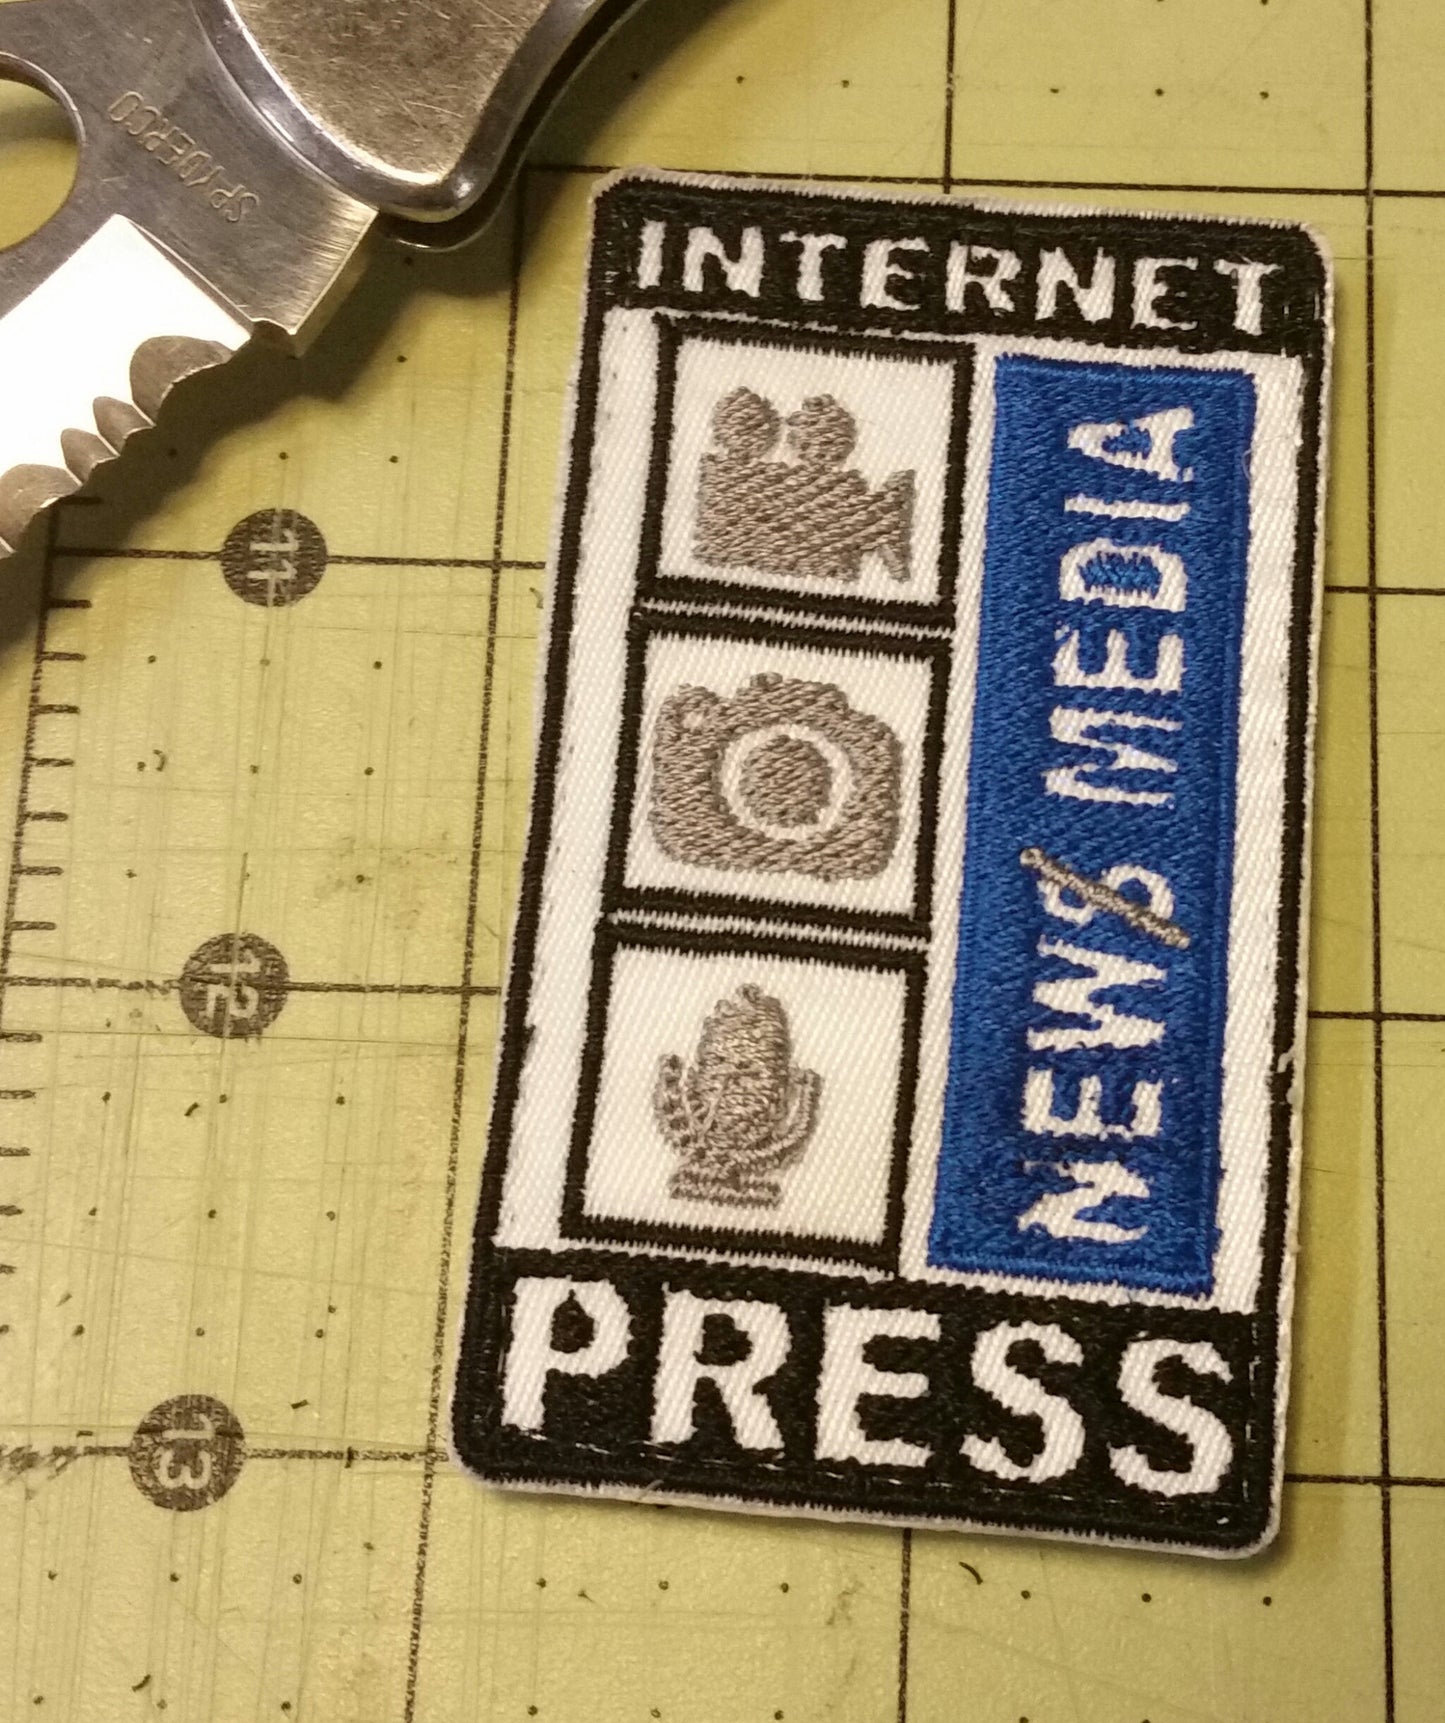 Sold Out - New Media (2nd Run) Multi-Color Patch